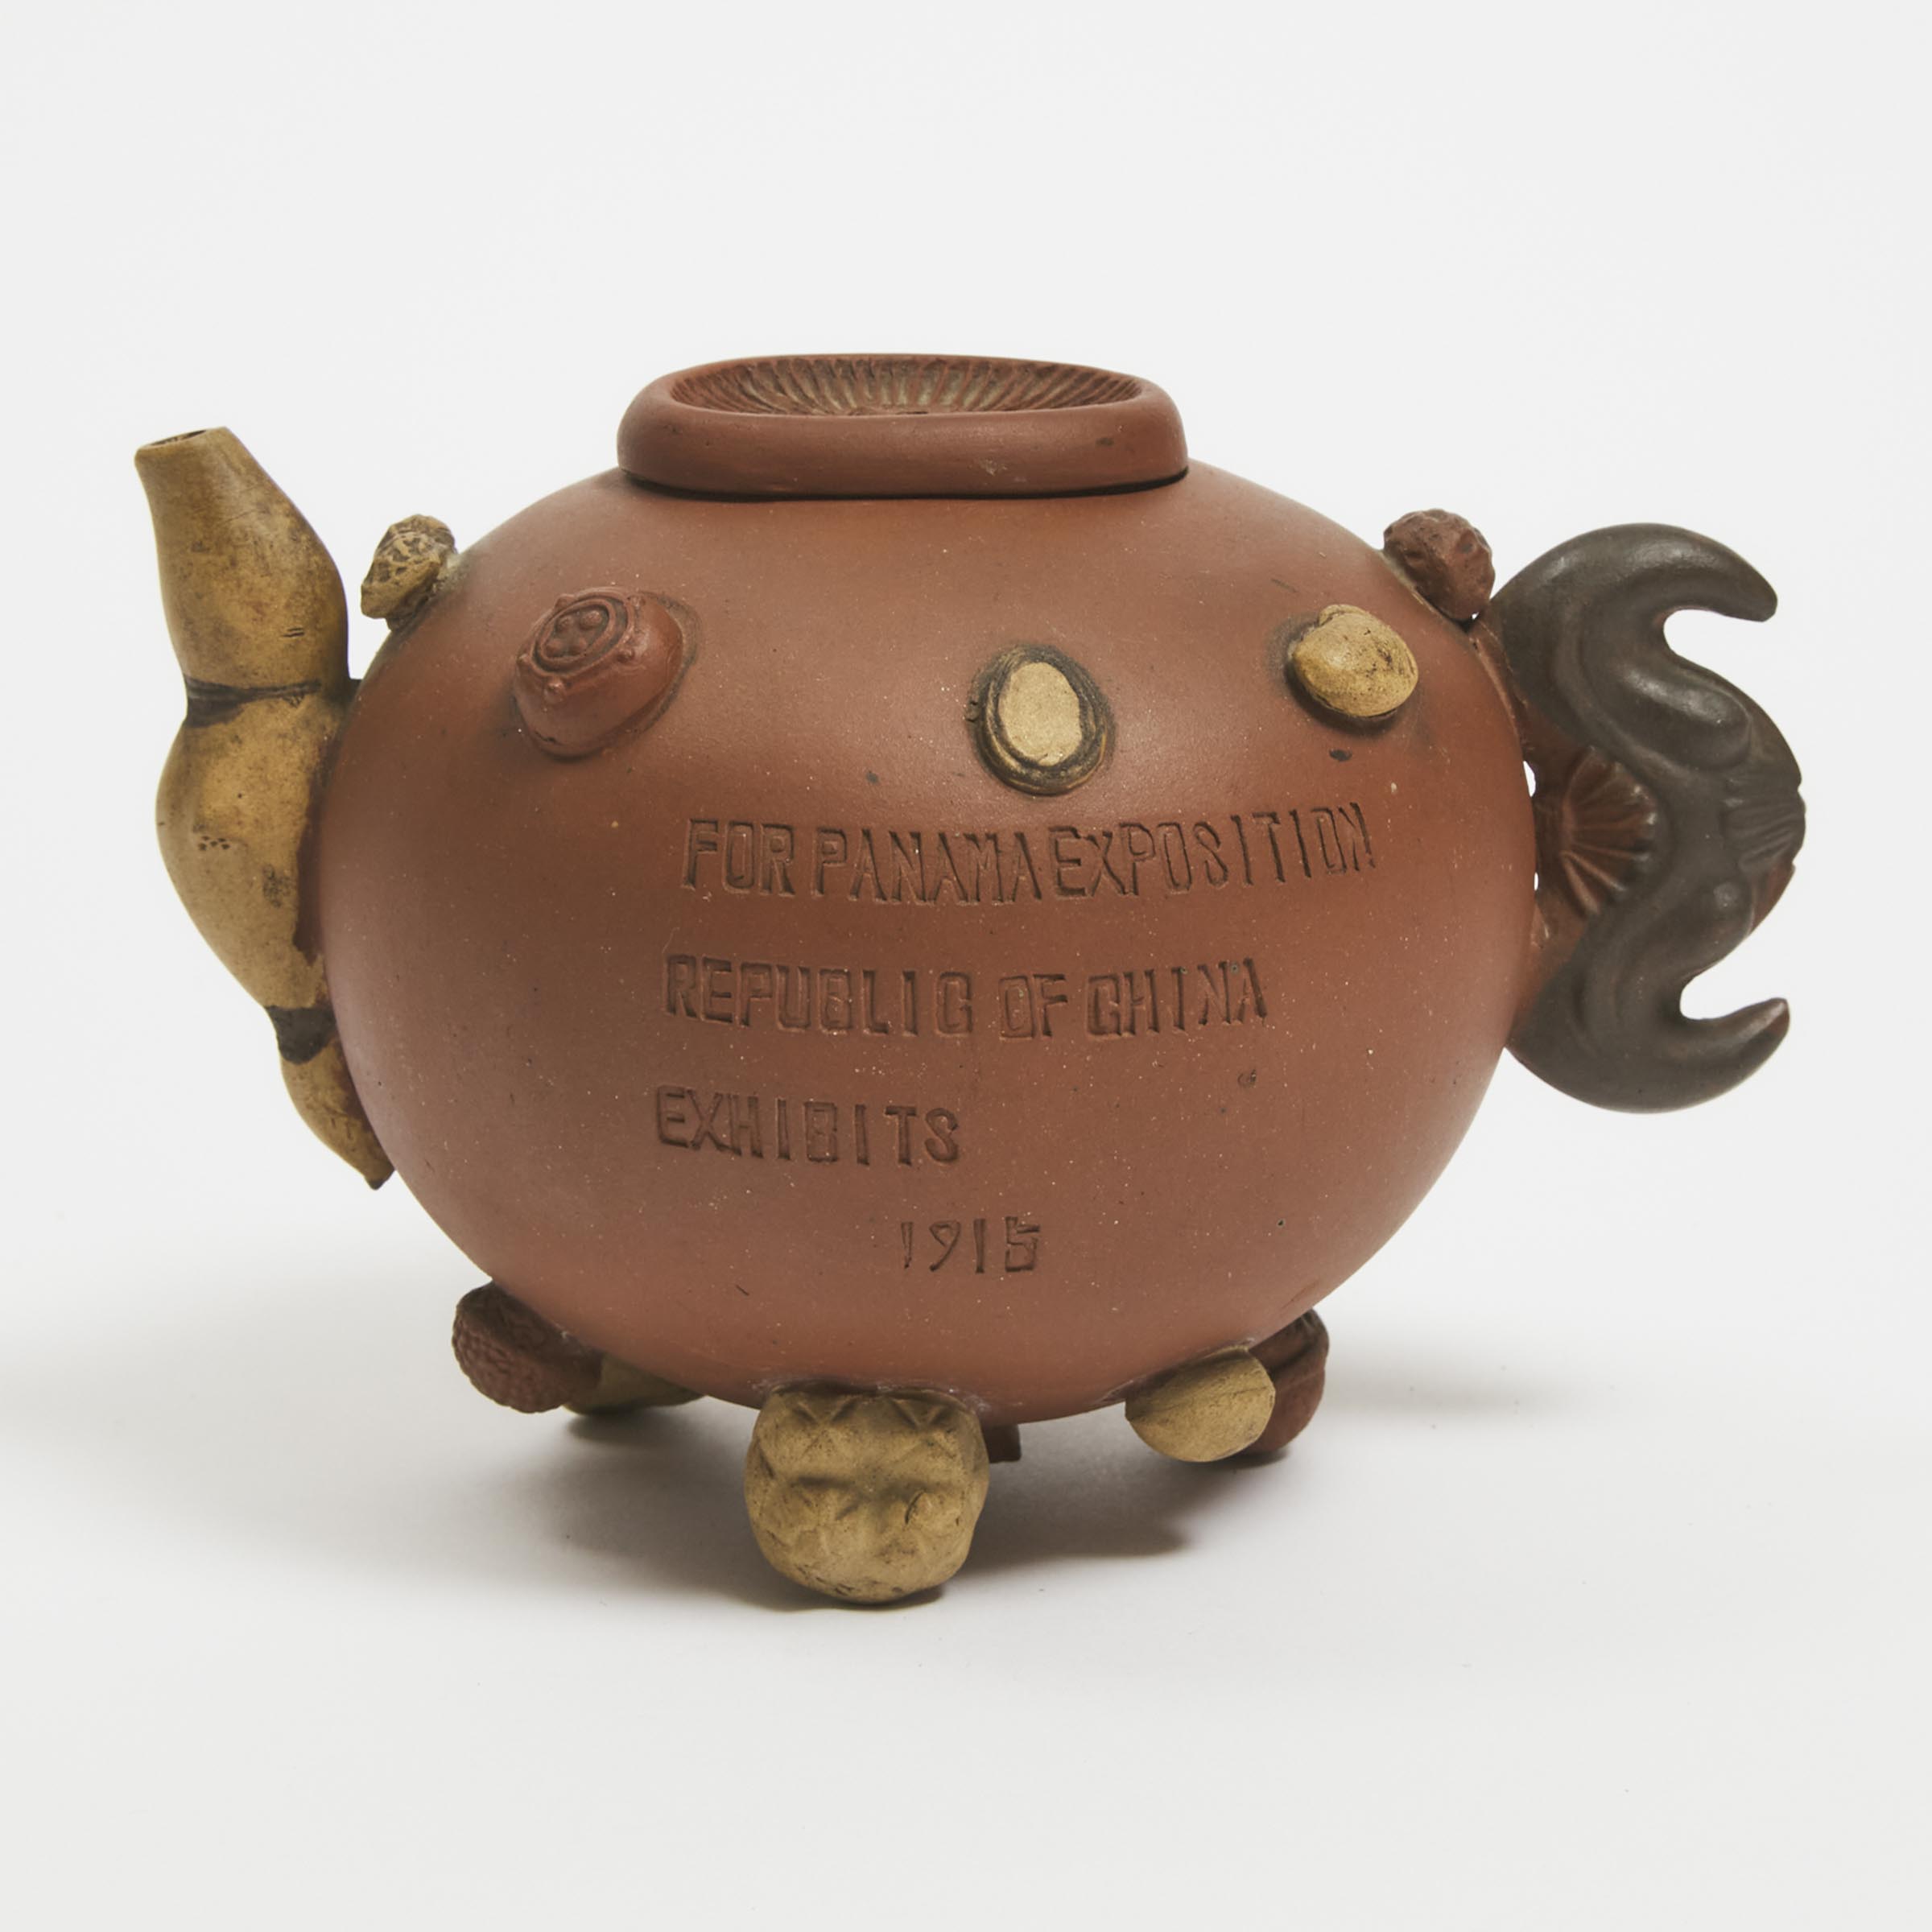 A Red Yixing/Zisha 'Nuts' Teapot With Panama Exposition Inscription, Dated 1915